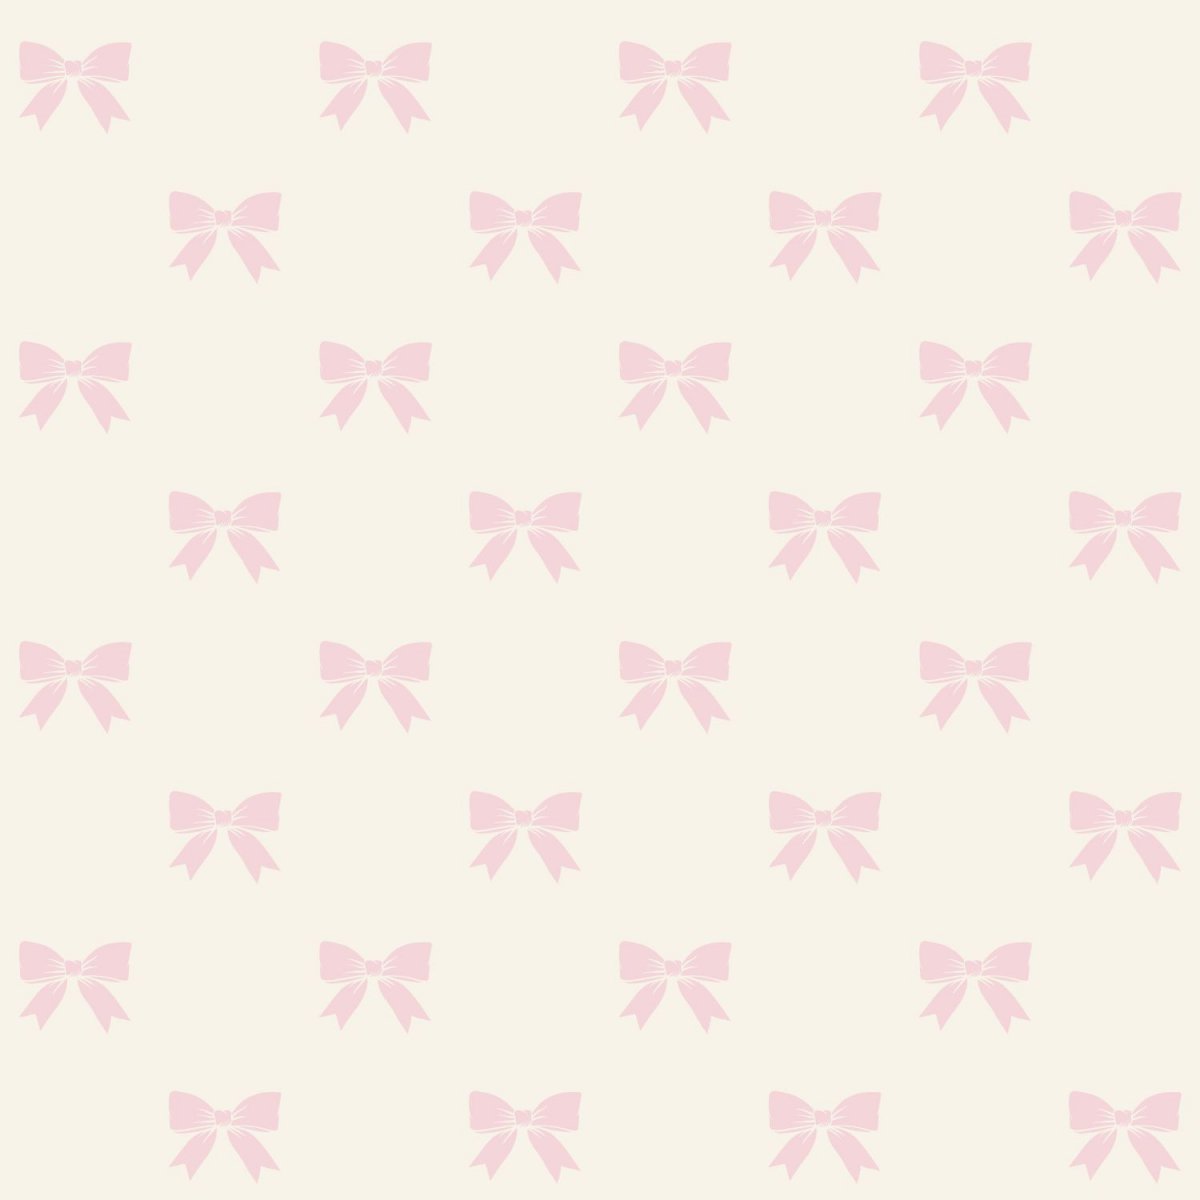 Pearl Wallpaper With Pink Bows Wallpaper On Line